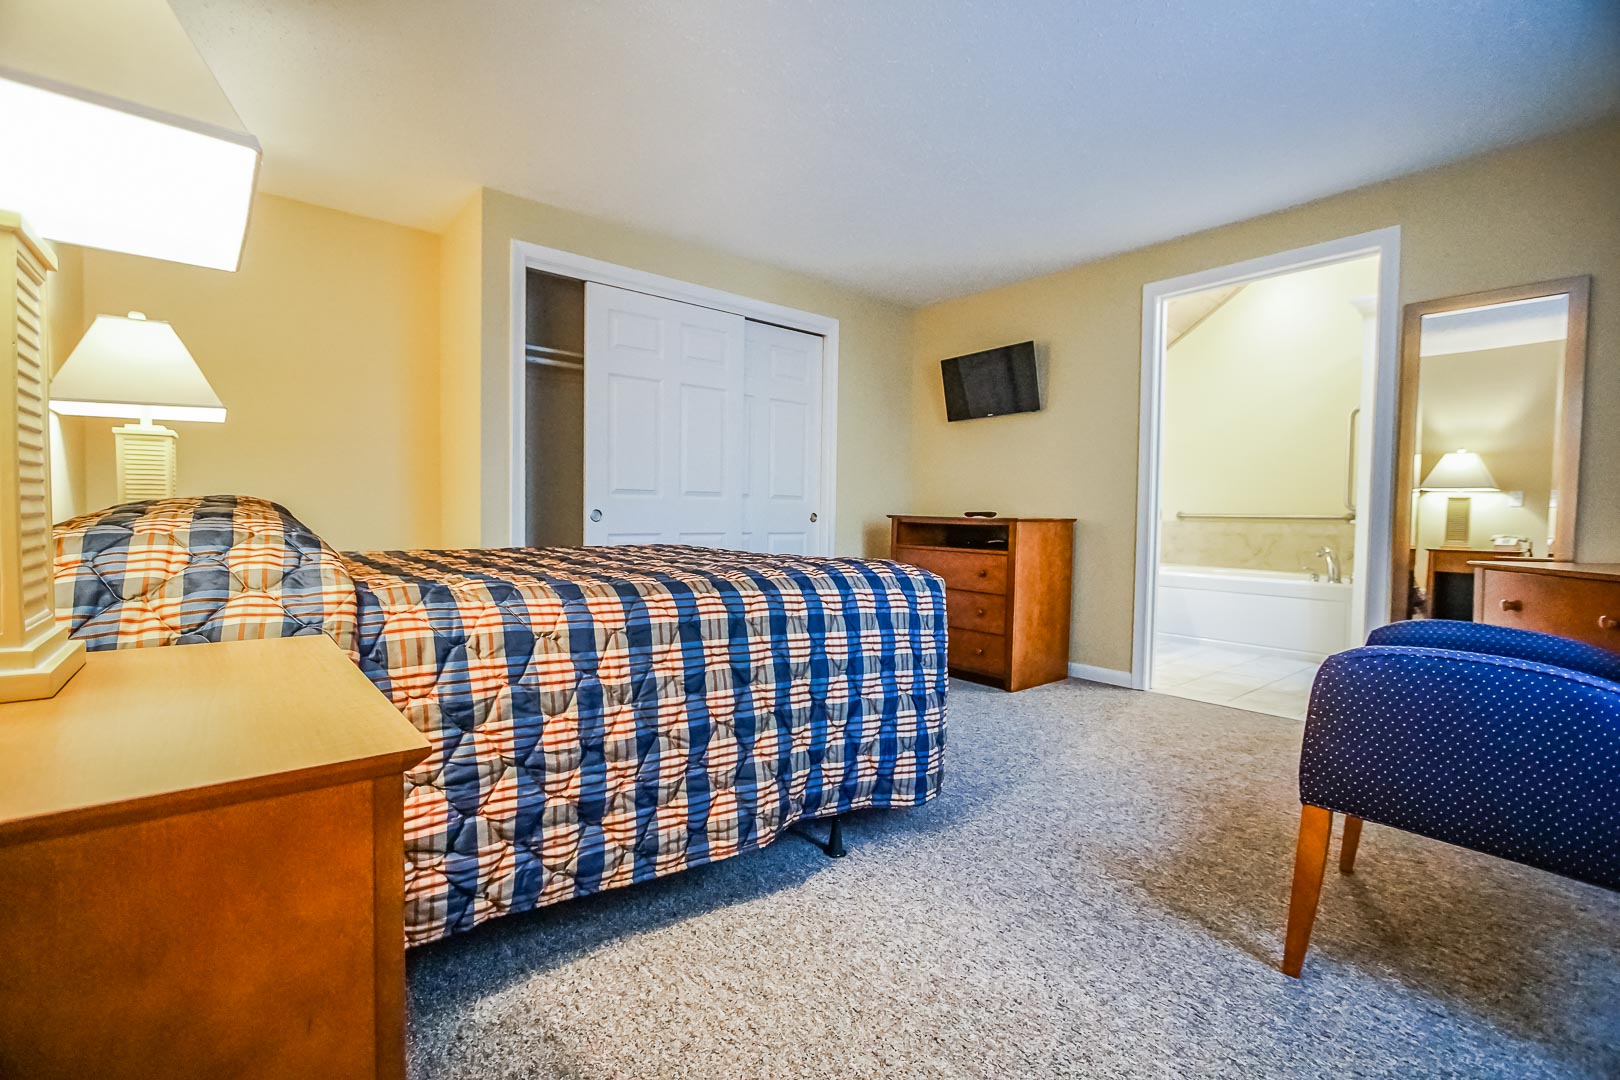 A fully equipped master bedroom at VRI's Cape Cod Holiday Estates in Massachusetts.